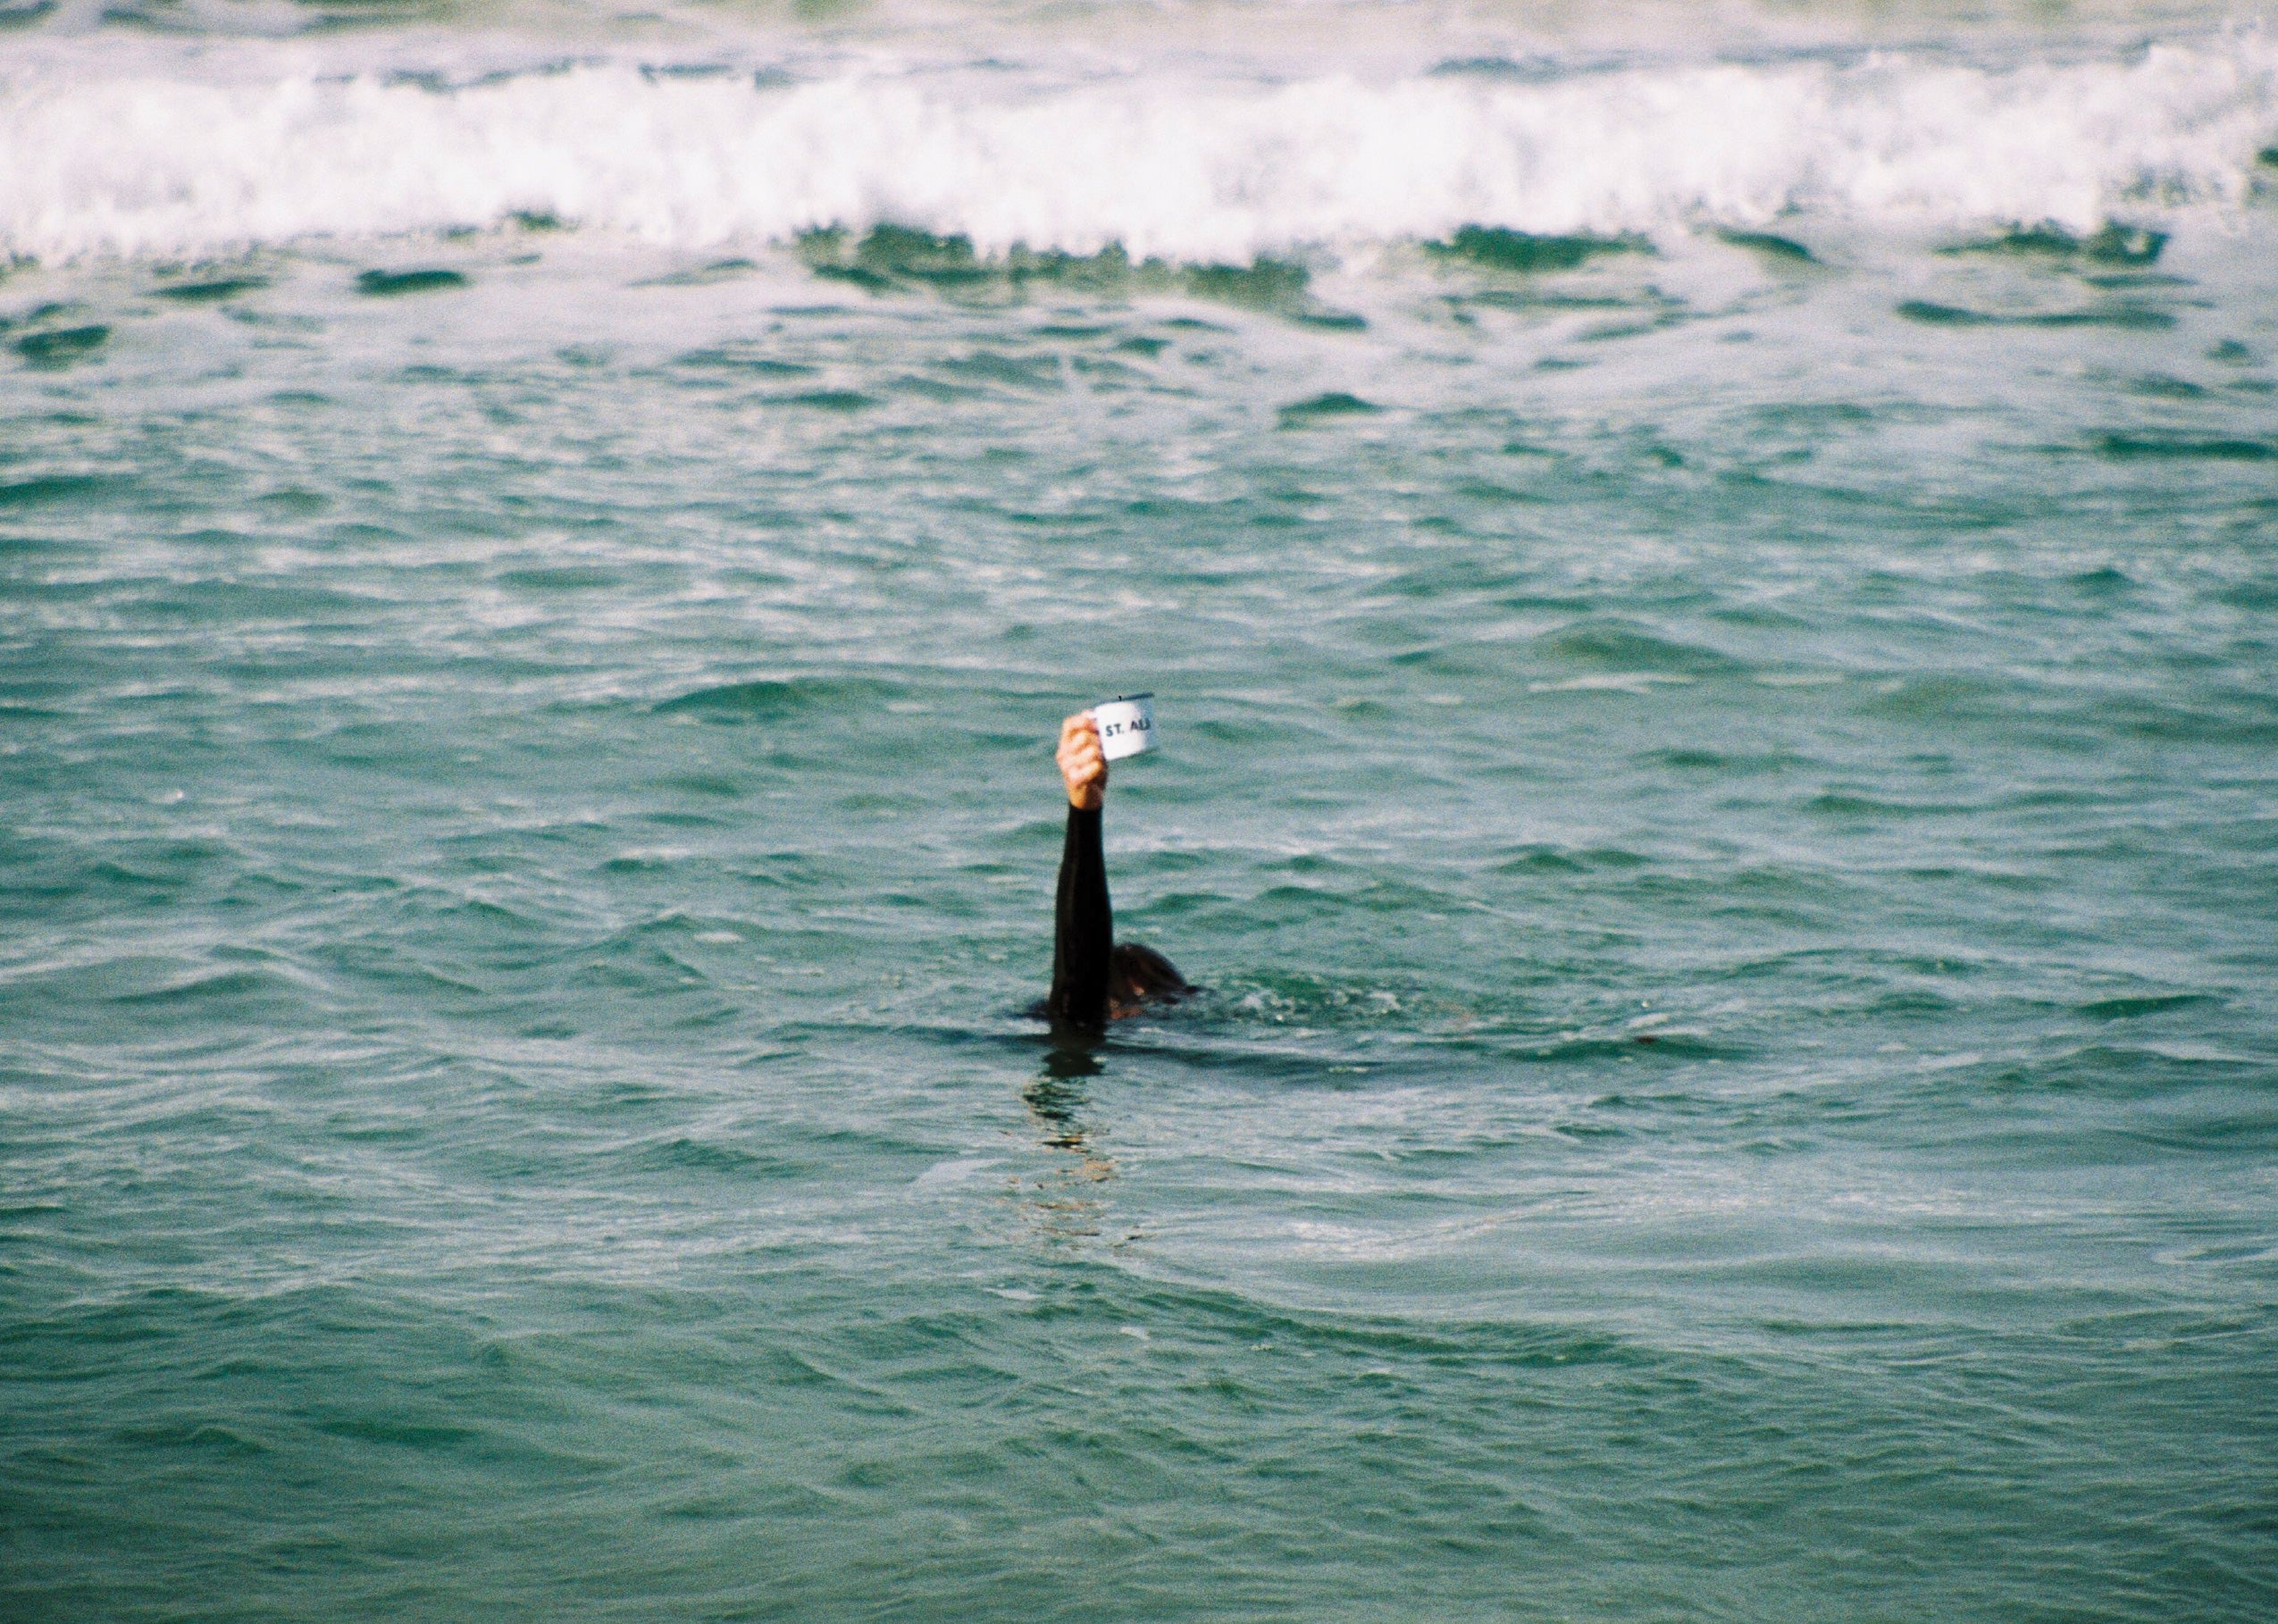 Submerged person holding coffee mug out of water at a beach